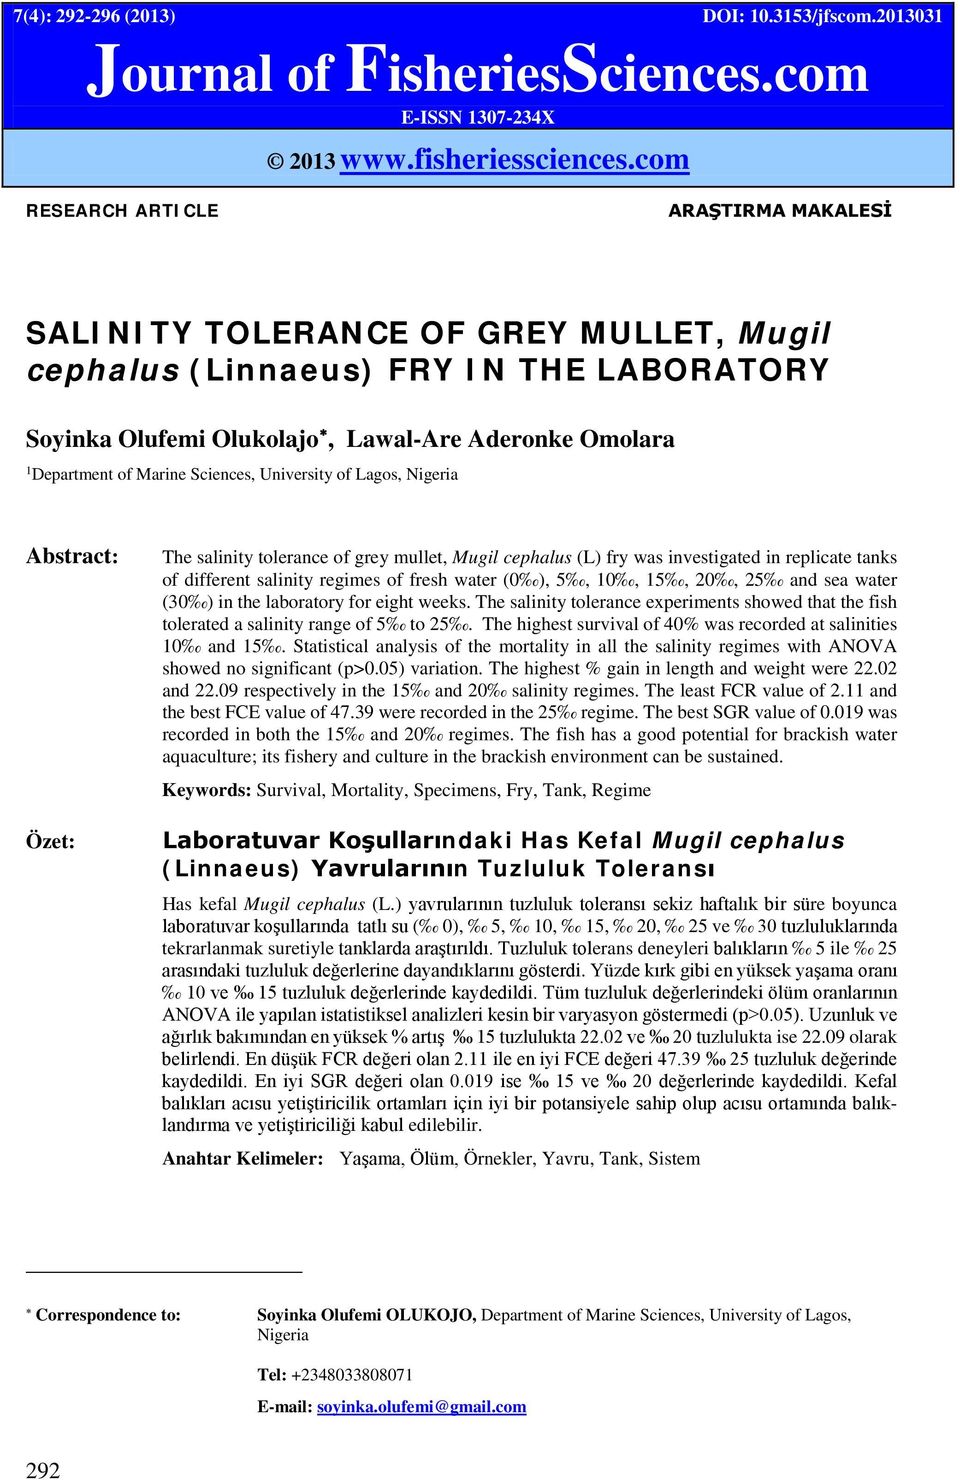 Sciences, University of Lagos, Nigeria Abstract: Özet: The salinity tolerance of grey mullet, Mugil cephalus (L) fry was investigated in replicate tanks of different salinity regimes of fresh water